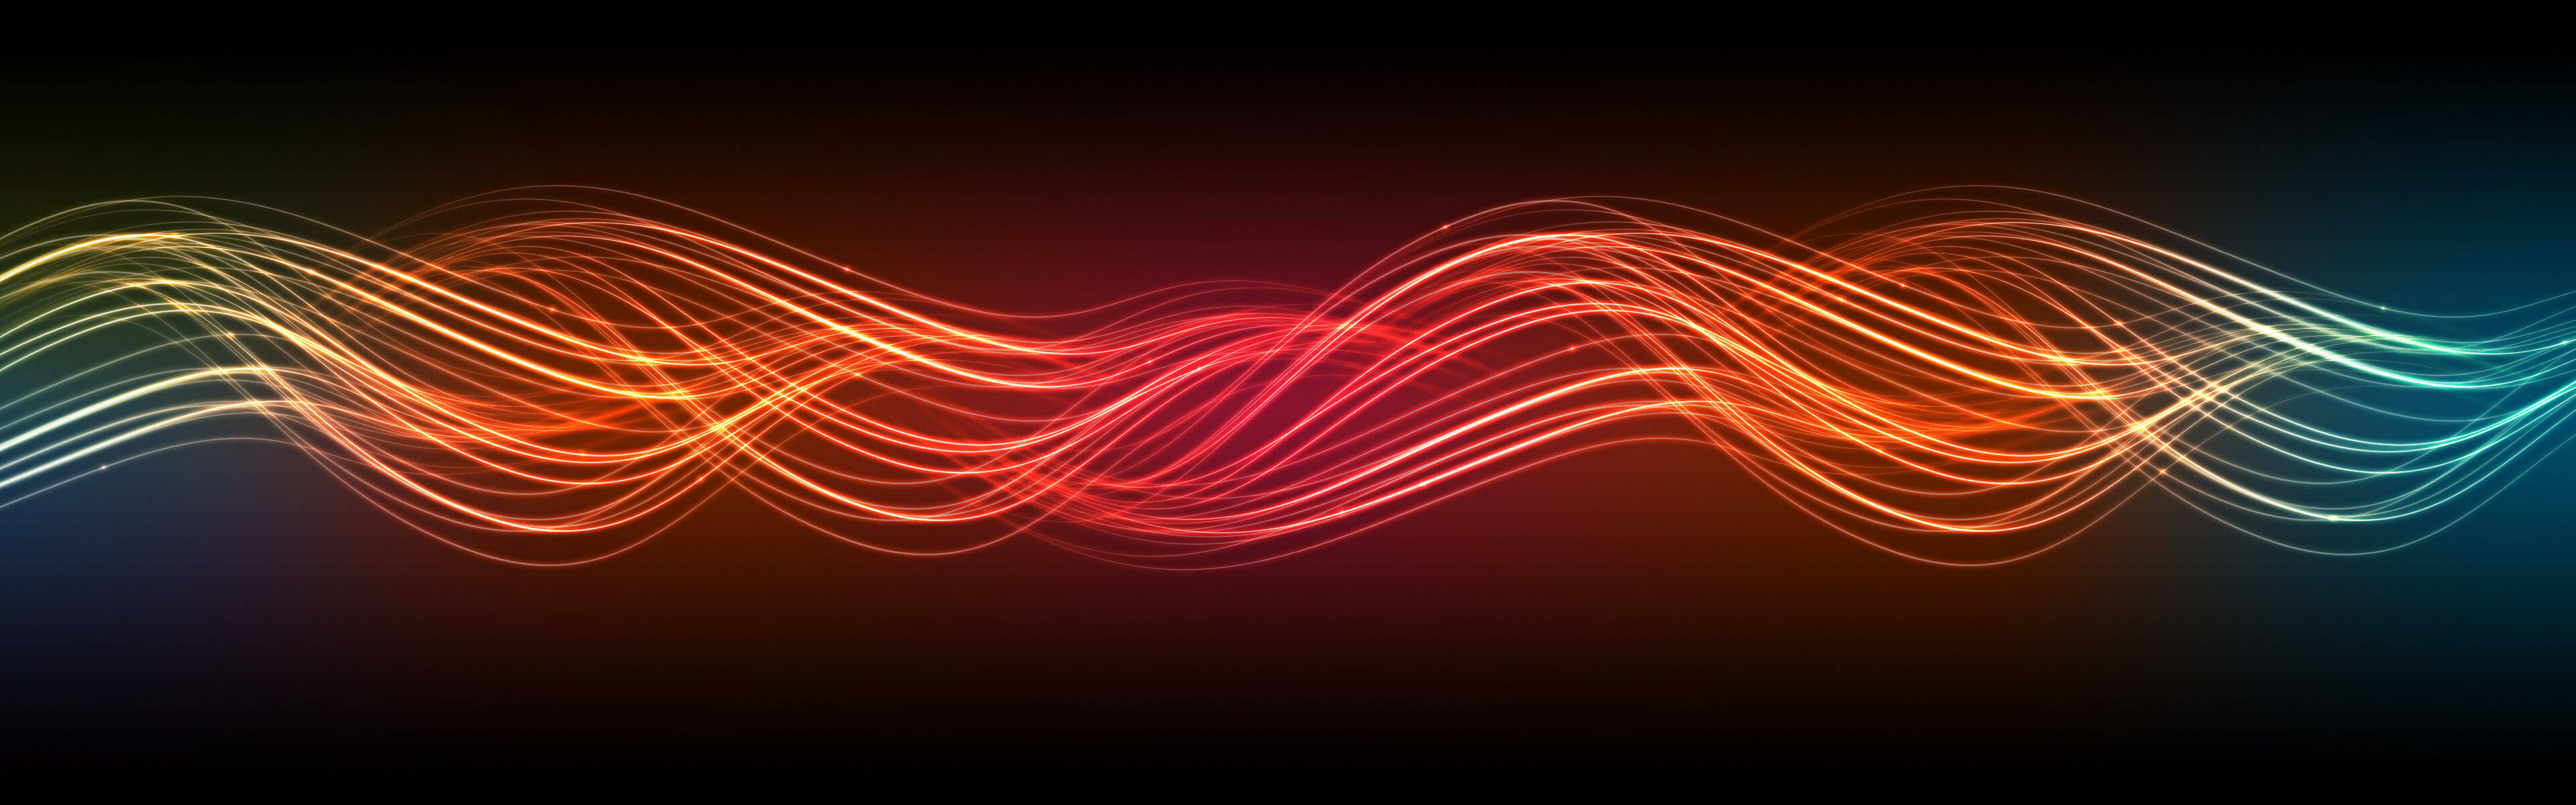 High Resolution Dual Monitor Flowing Lines Background